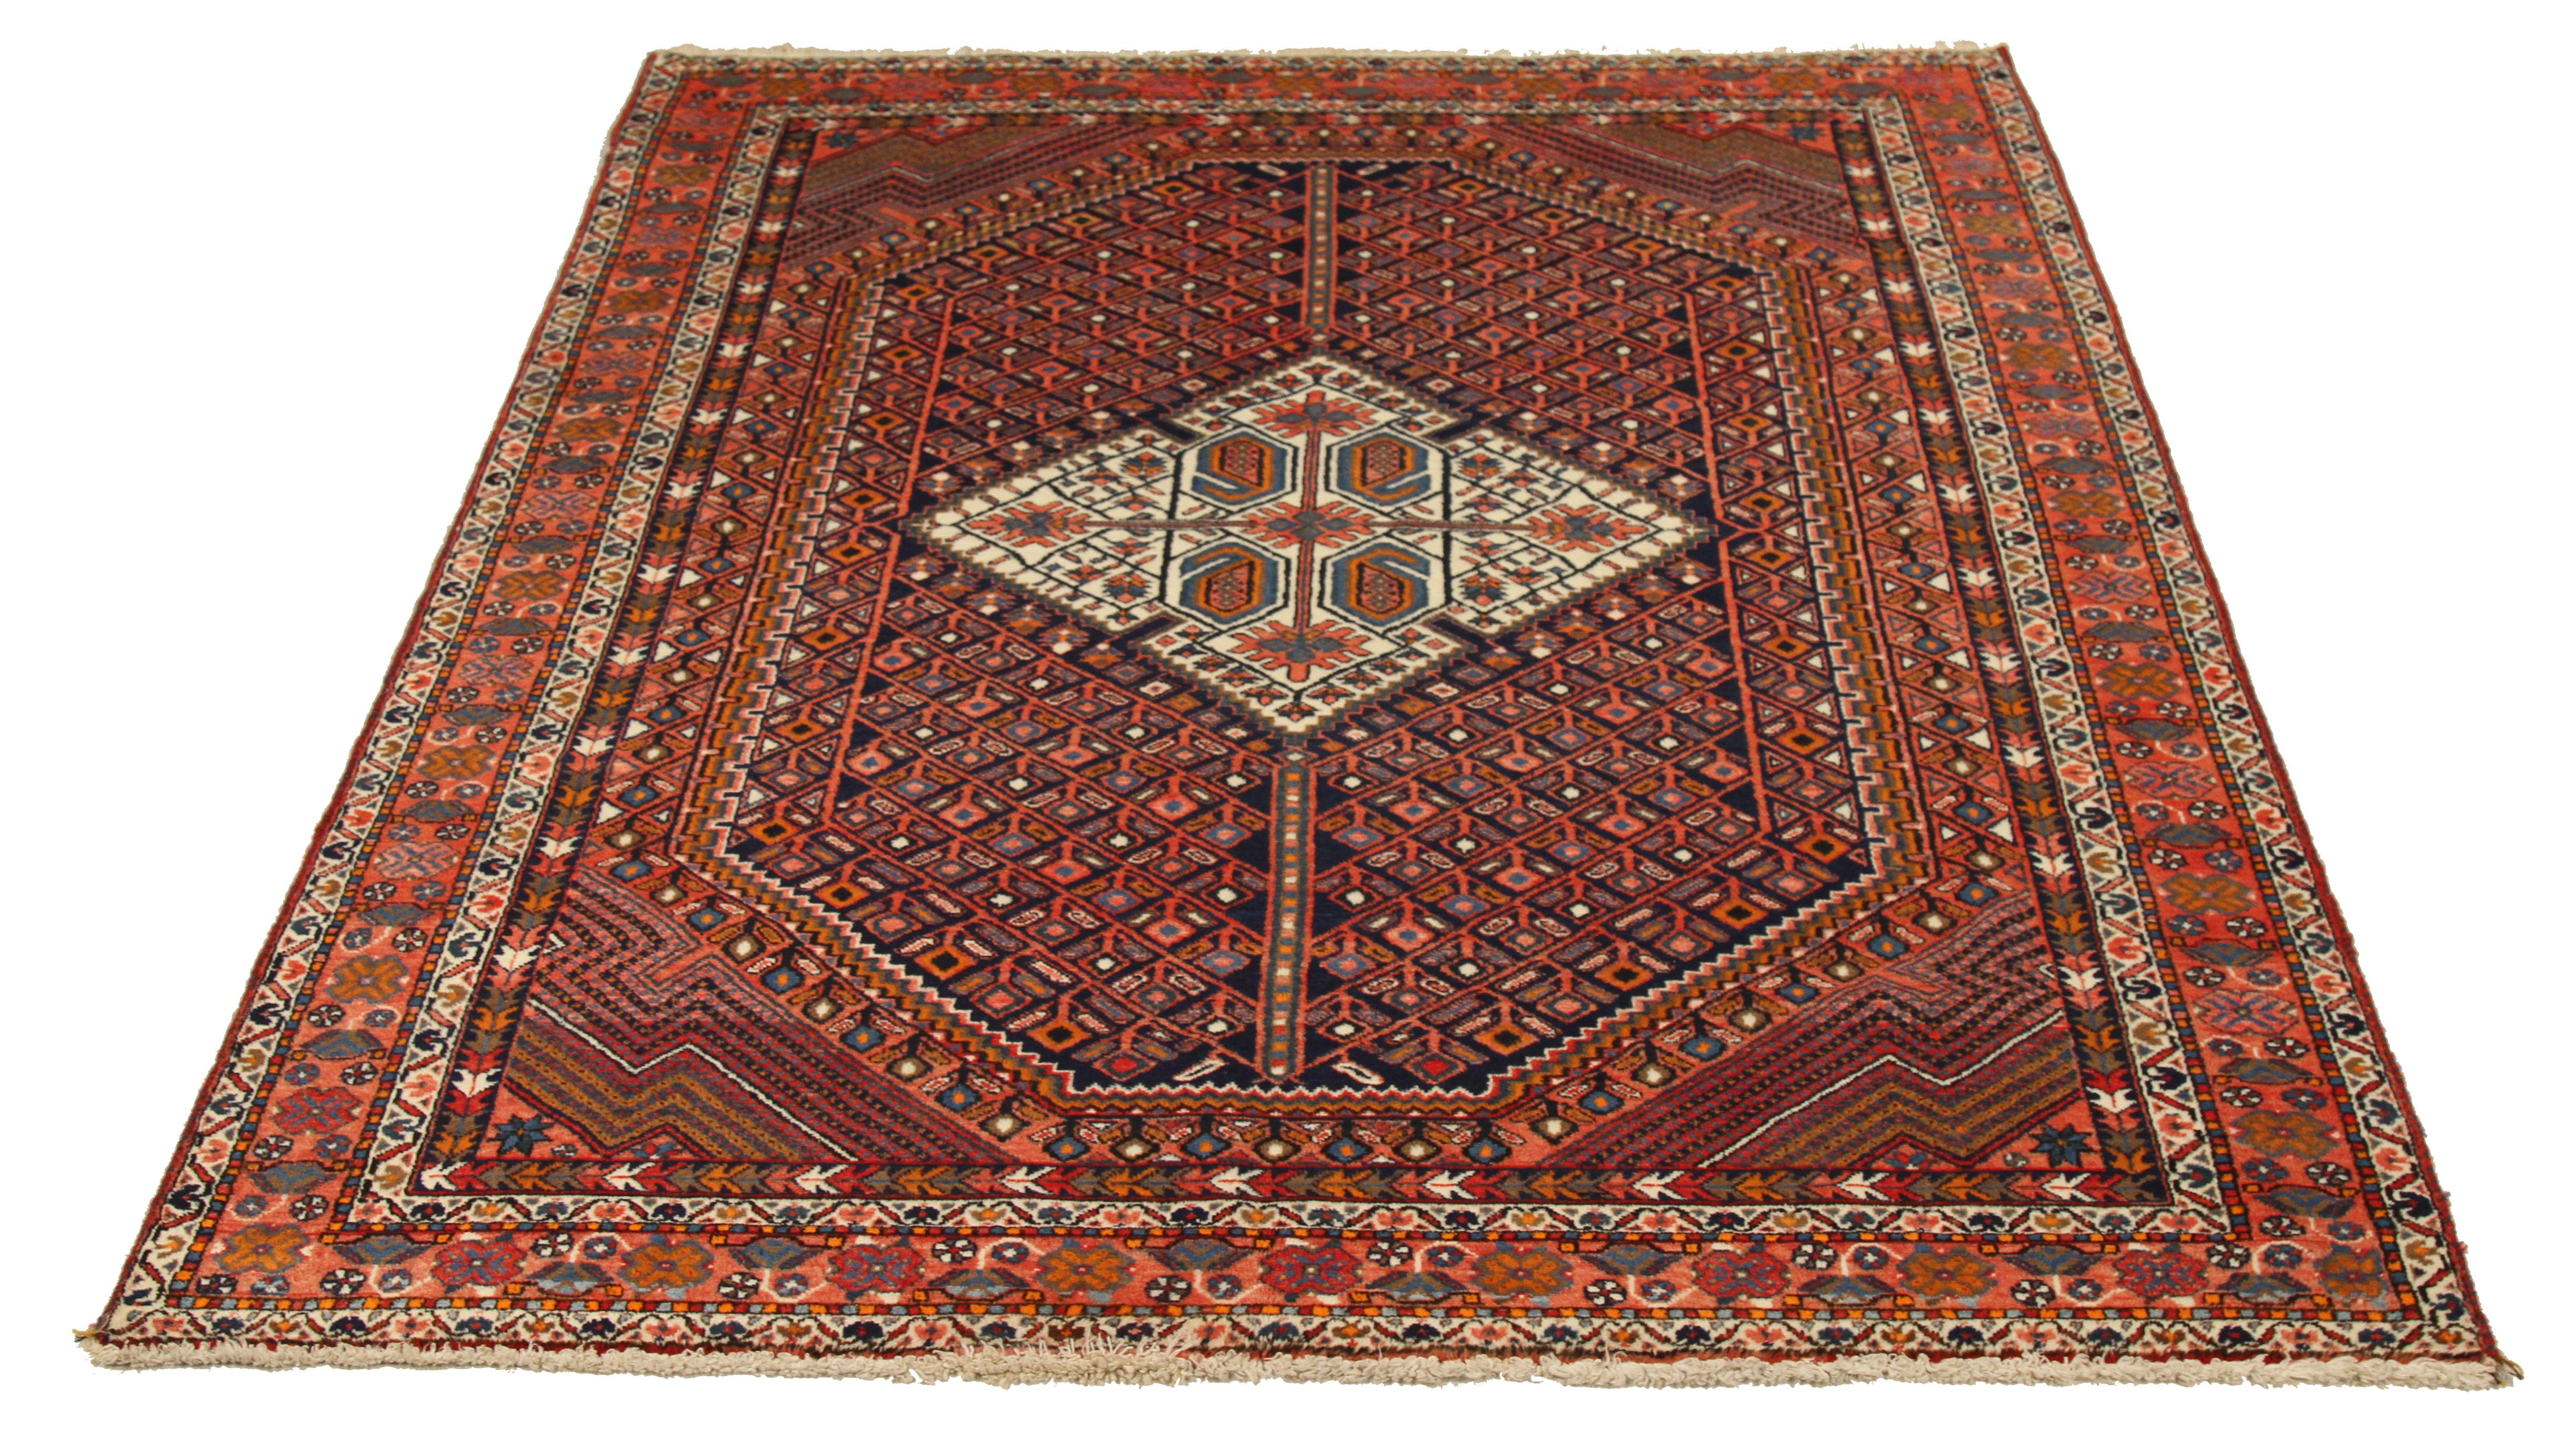 Mid-20th century hand-woven Persian area rug made from fine wool and all-natural vegetable dyes that are safe for people and pets. It features traditional Sirjan weaving depicting intricate geometric patterns mixed with floral elements. It has an